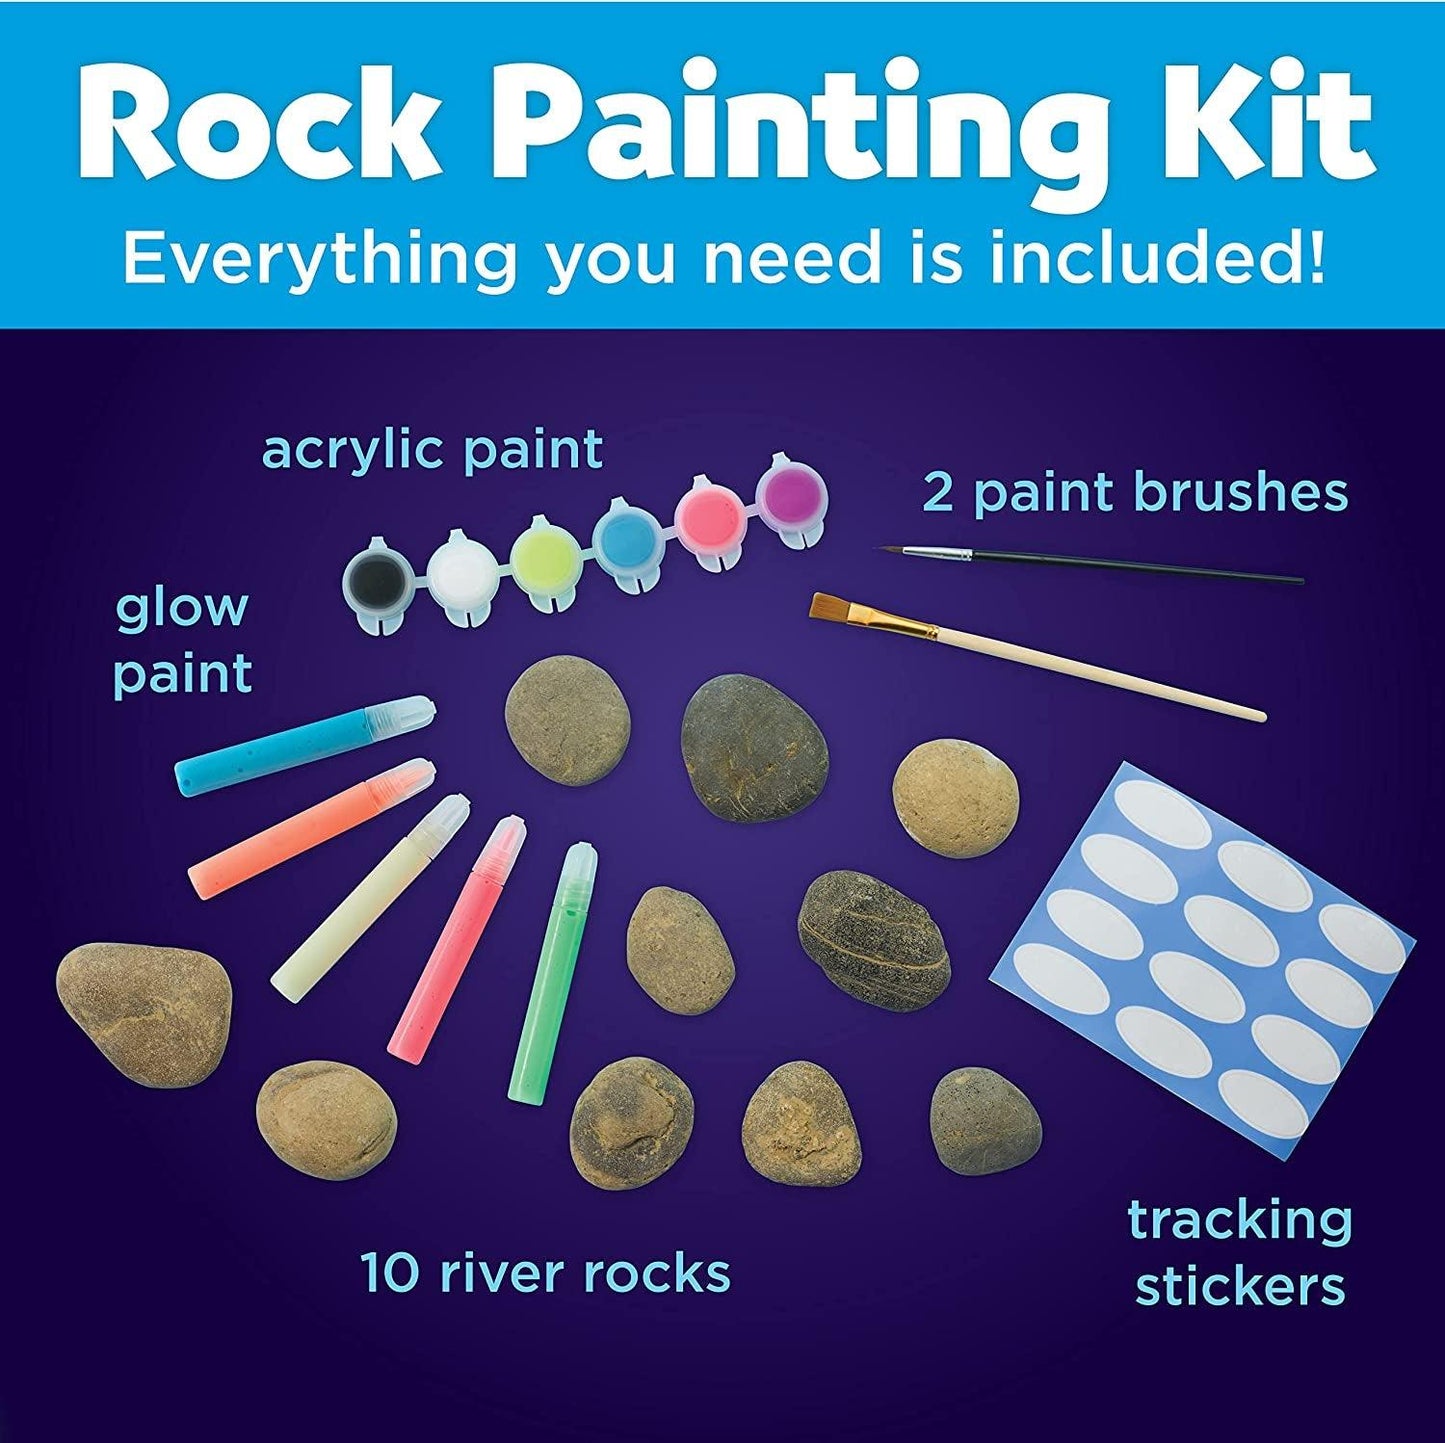 Creativity for Kids Glow in the Dark Rock Painting Kit - Painting Rocks Craft, Arts and Crafts - WoodArtSupply